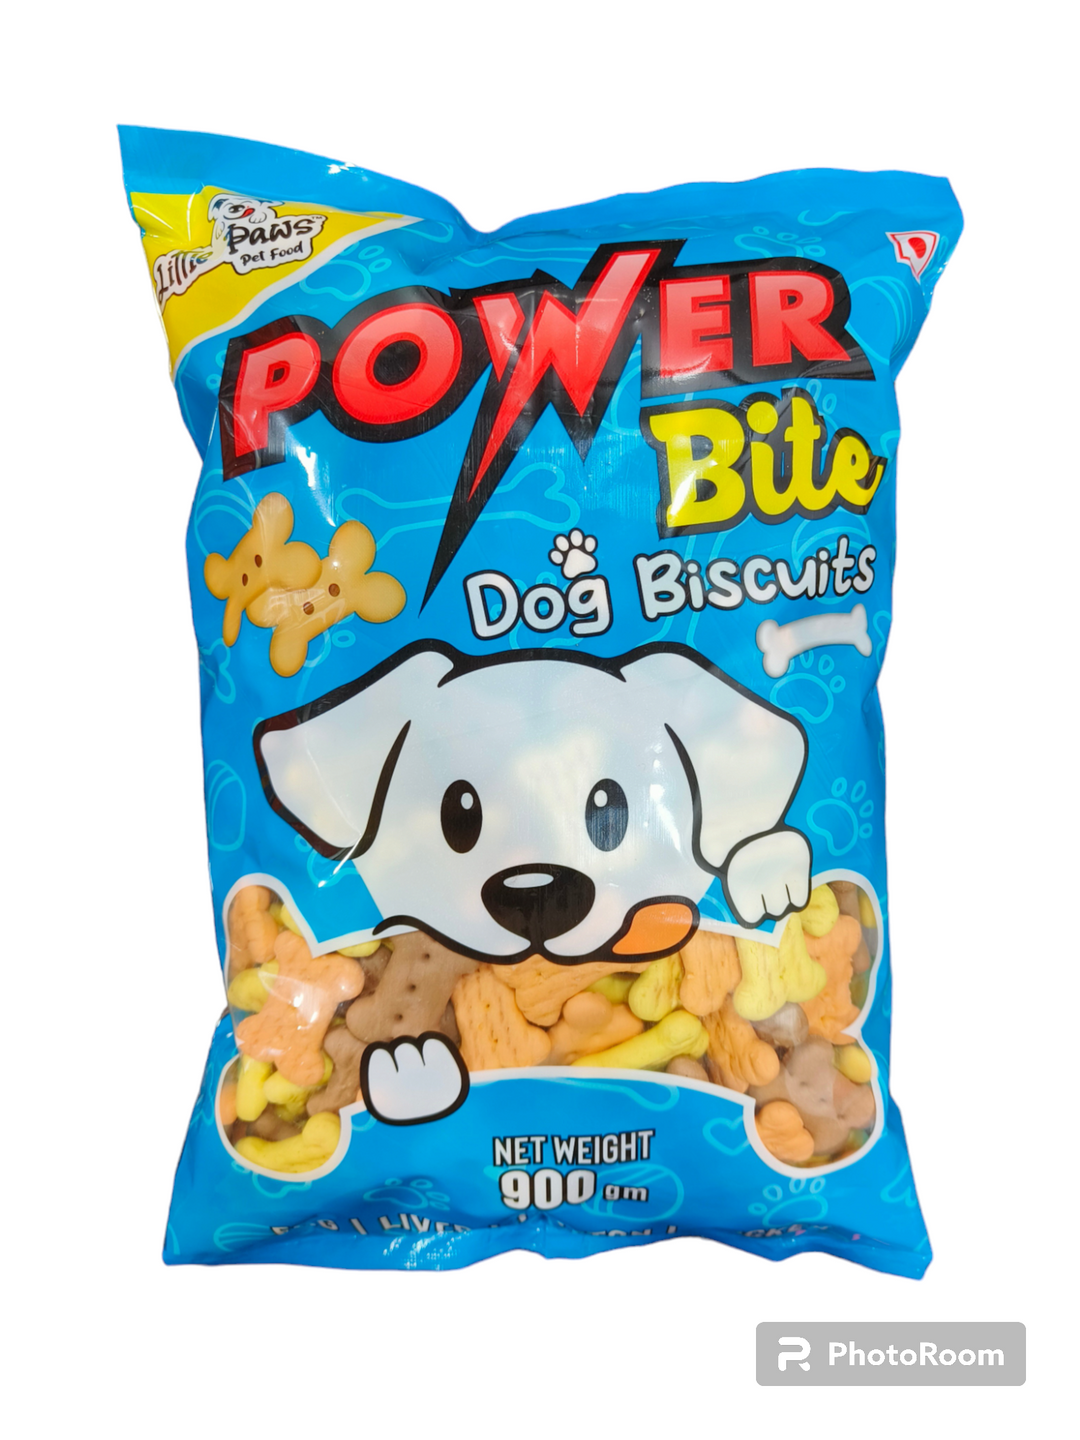 LITTLE PAWS Power Bite Puppy Mix  Biscuits 900 Grms –NONVEG